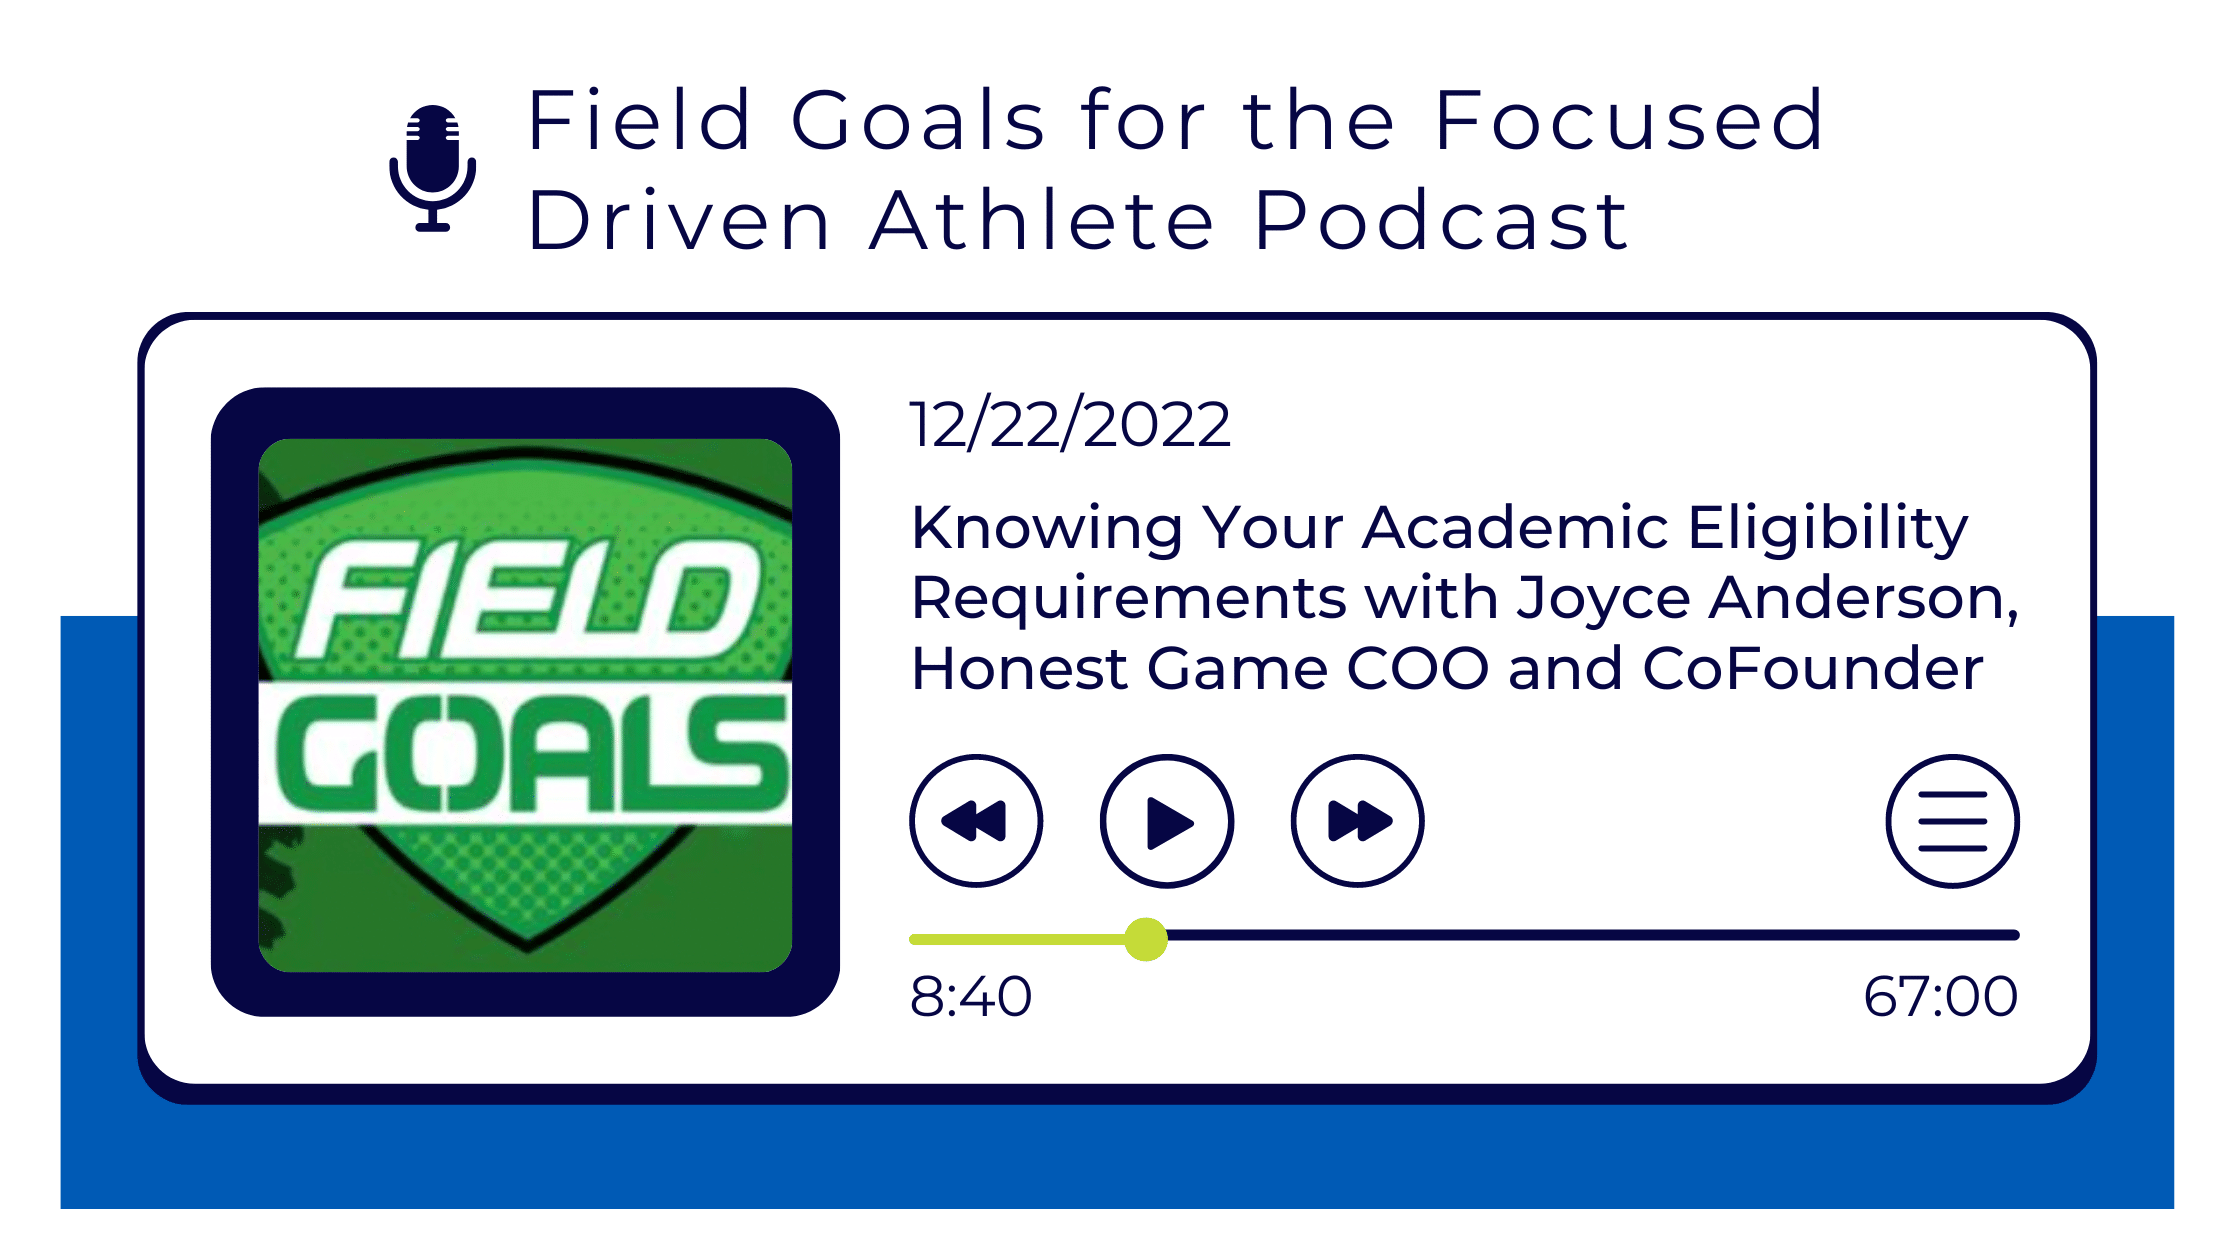 Field Goals for the Focused Driven Athlete Podcast